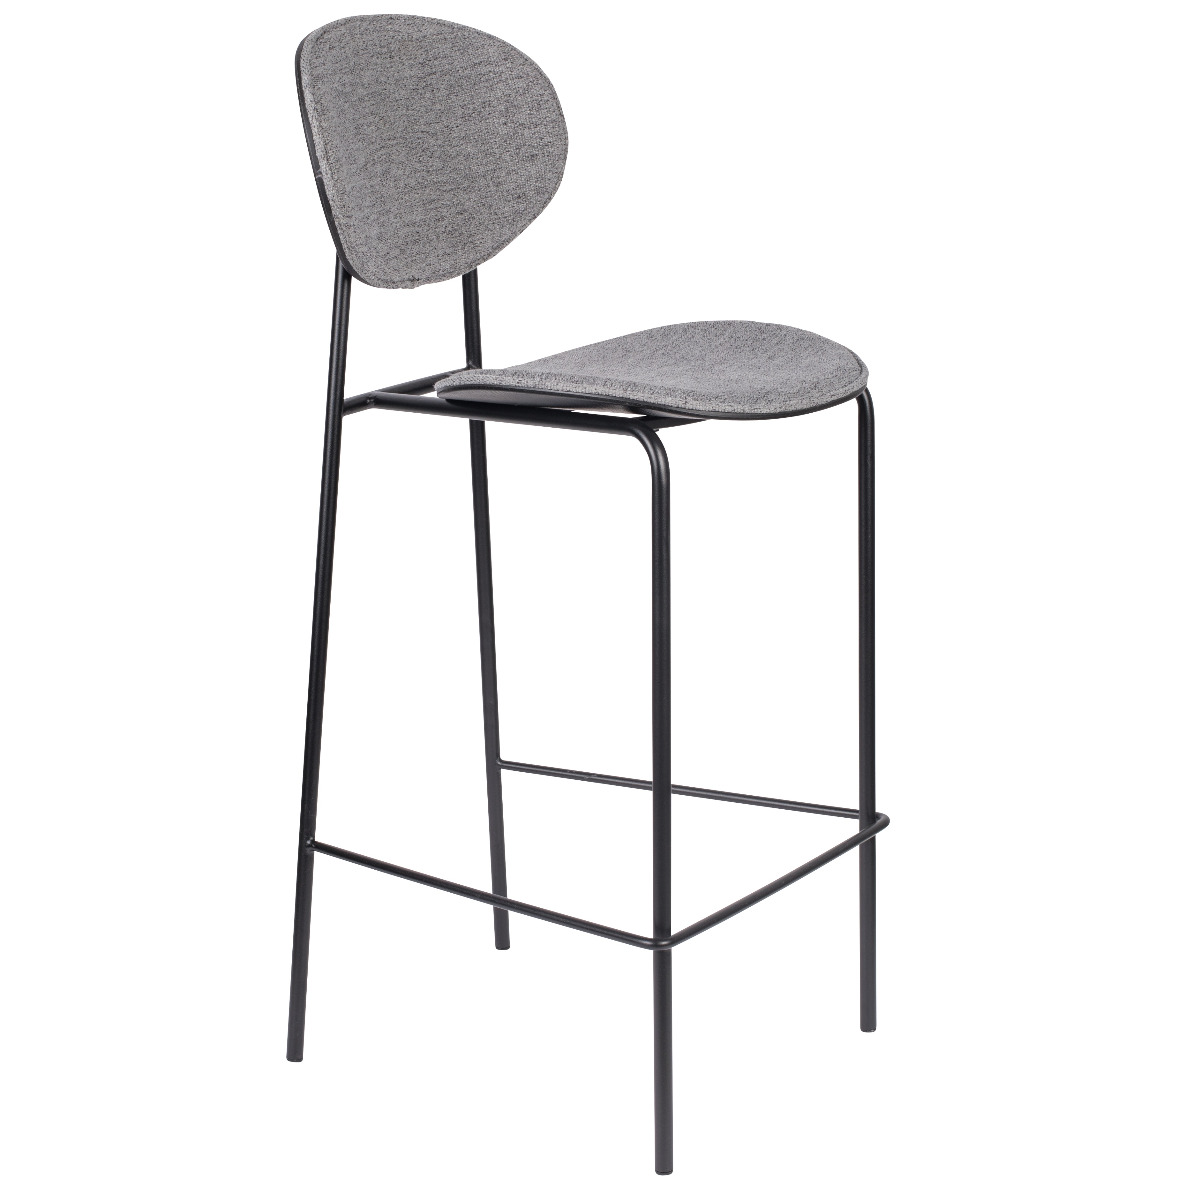 COUNTER STOOL DONNY GREY